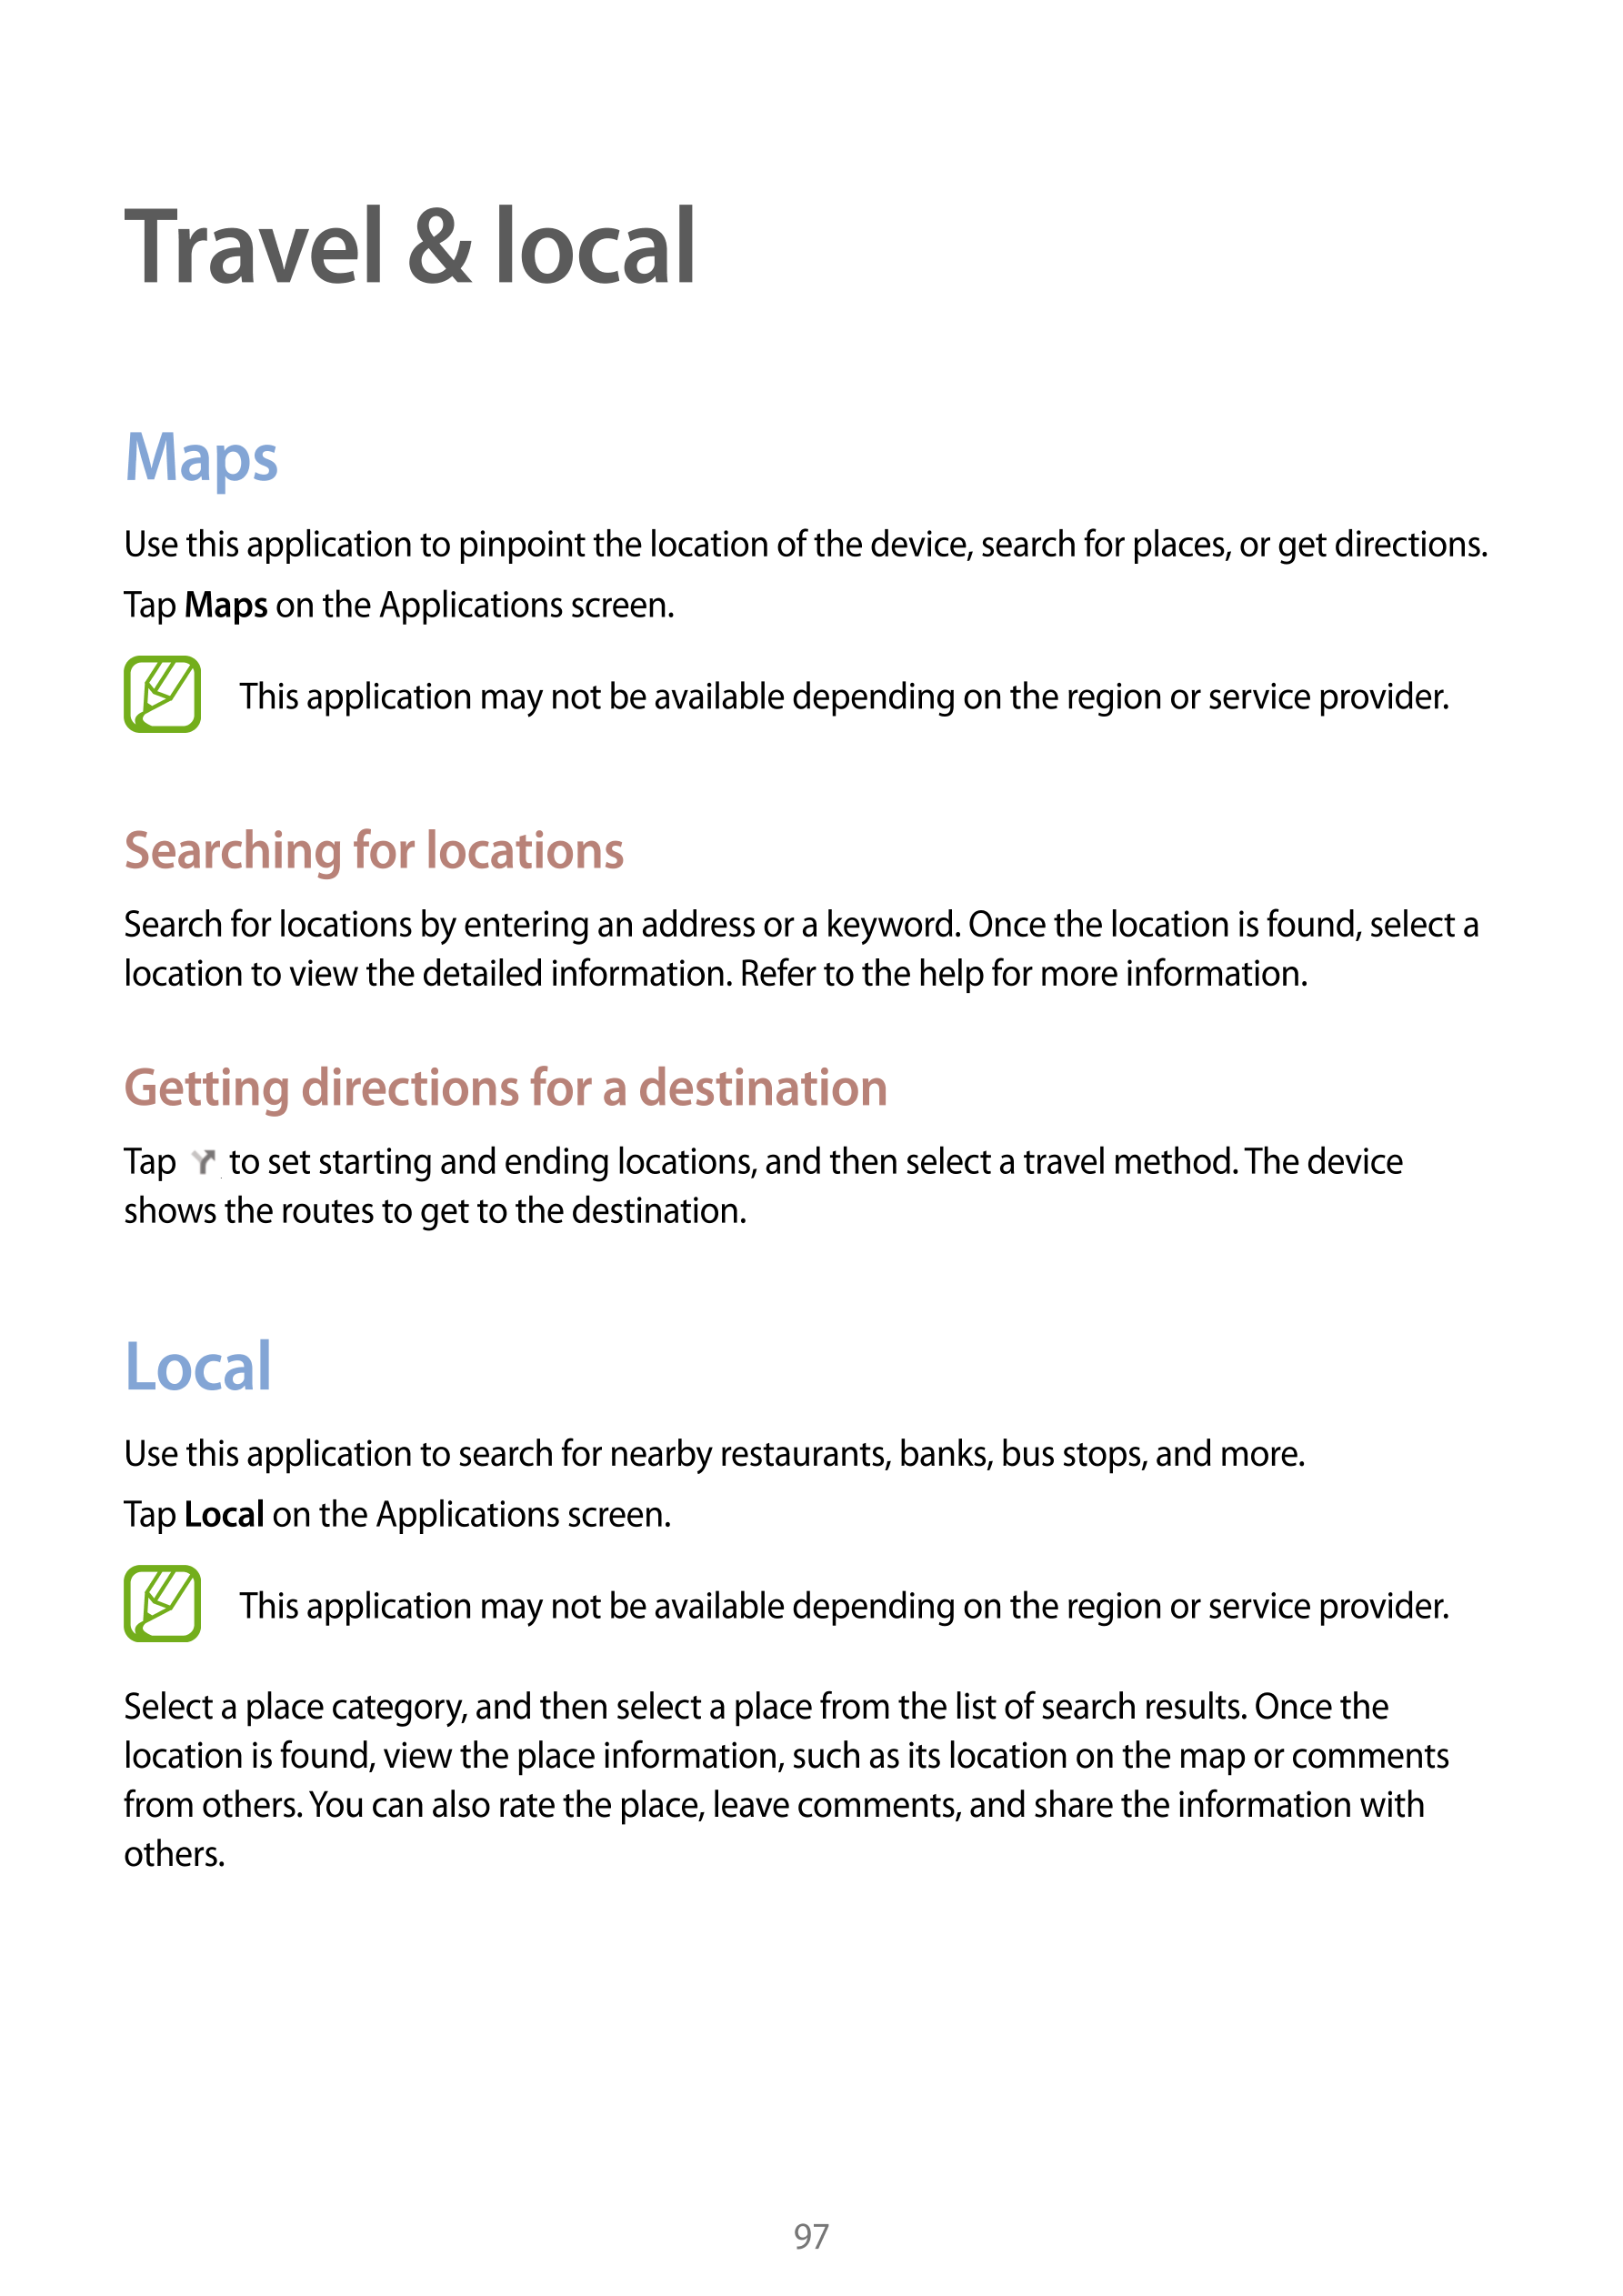 Travel & local
Maps
Use this application to pinpoint the location of the device, search for places, or get directions.
Tap  Maps